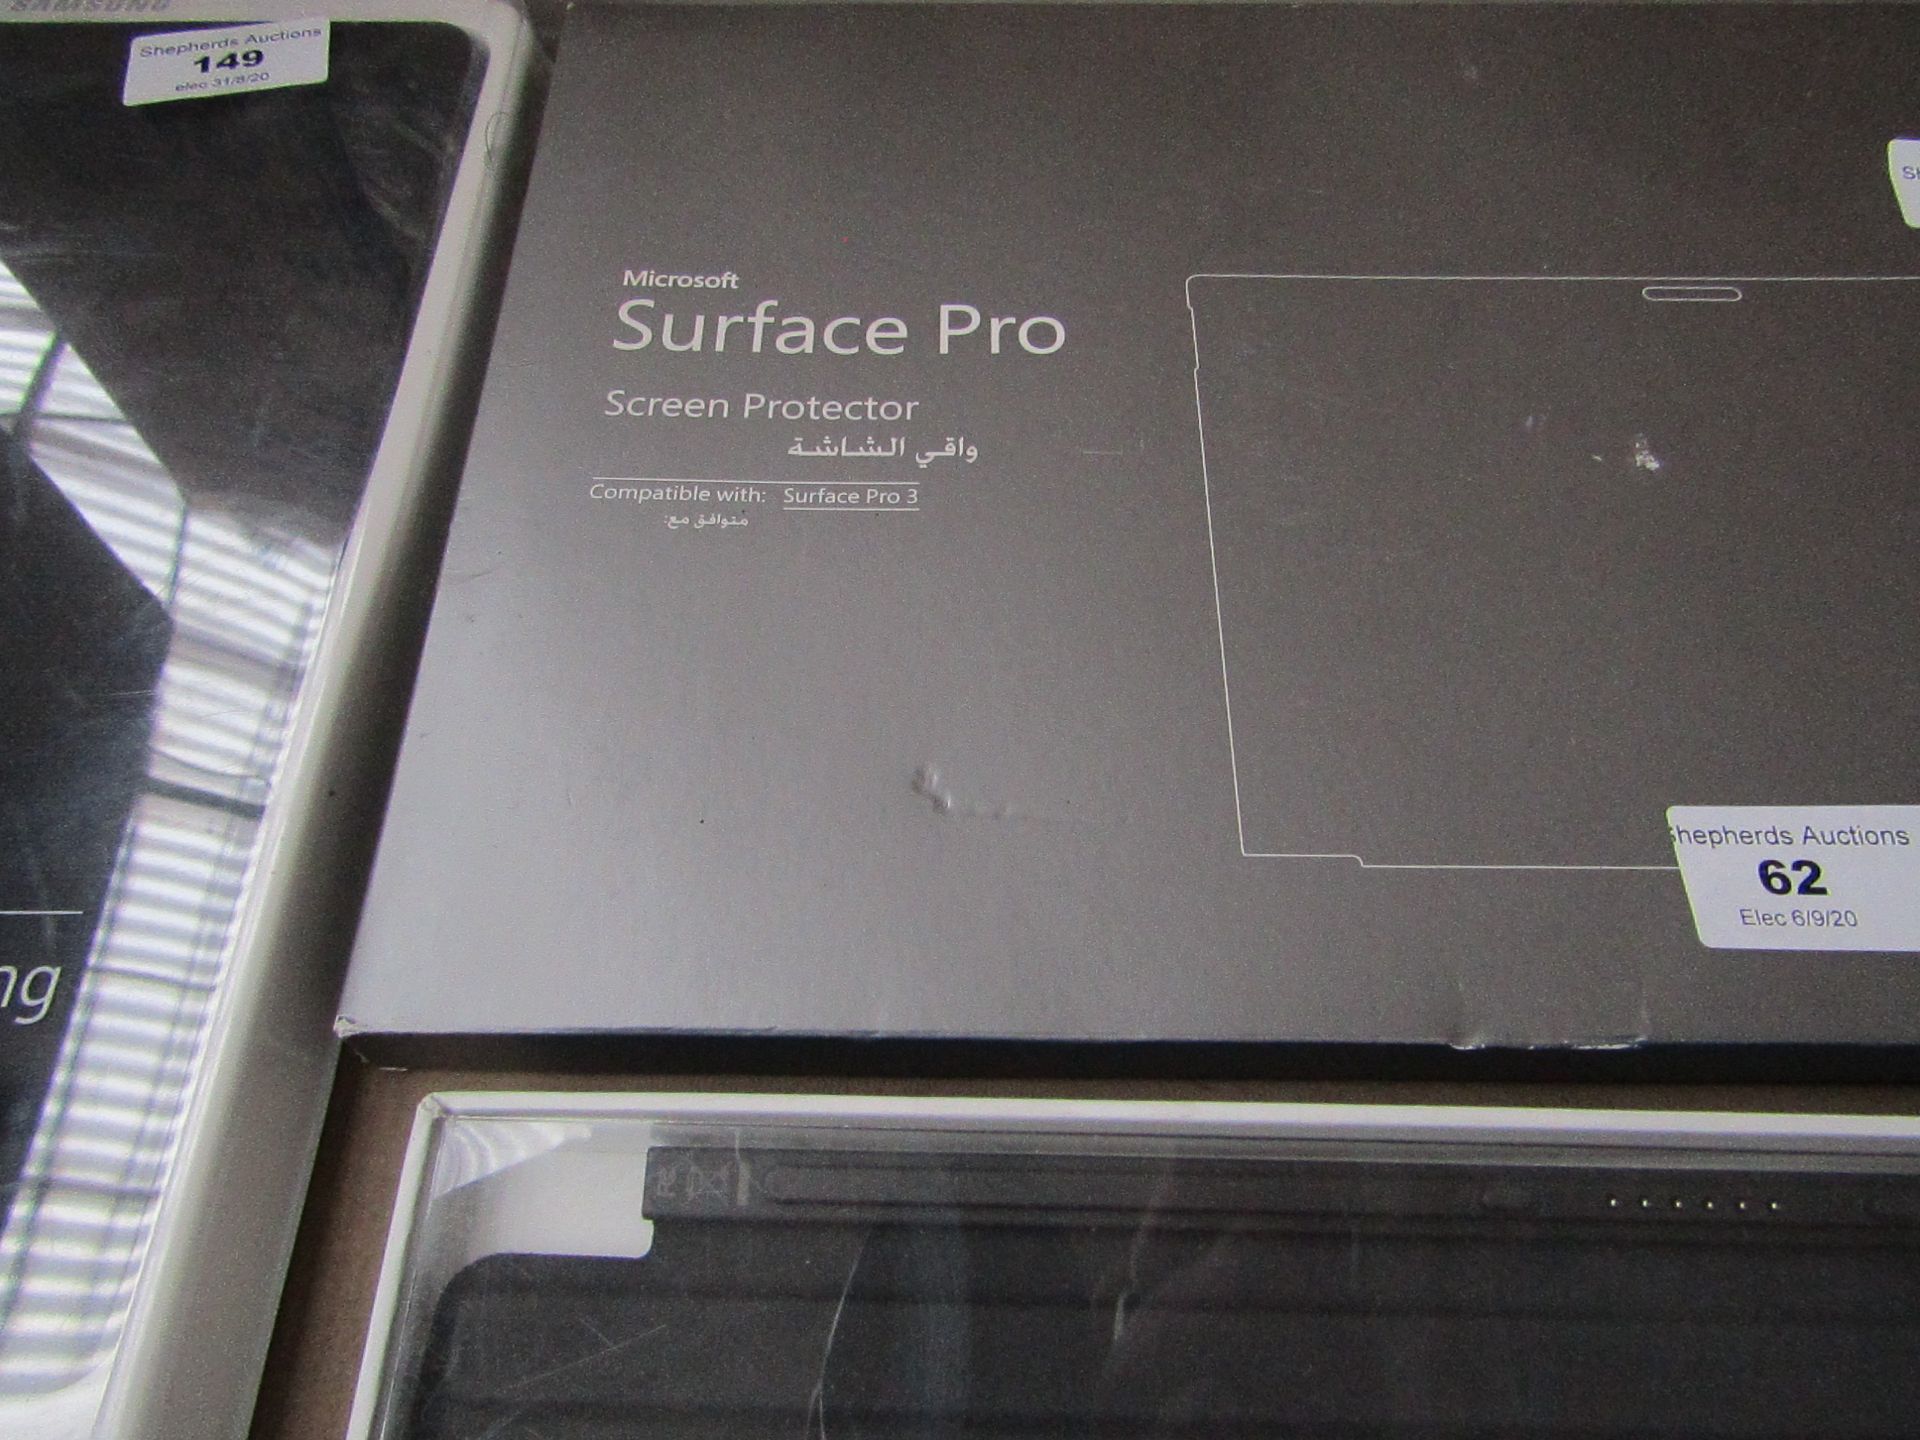 Microsoft Surface Pro screen protector, unchecked and boxed.